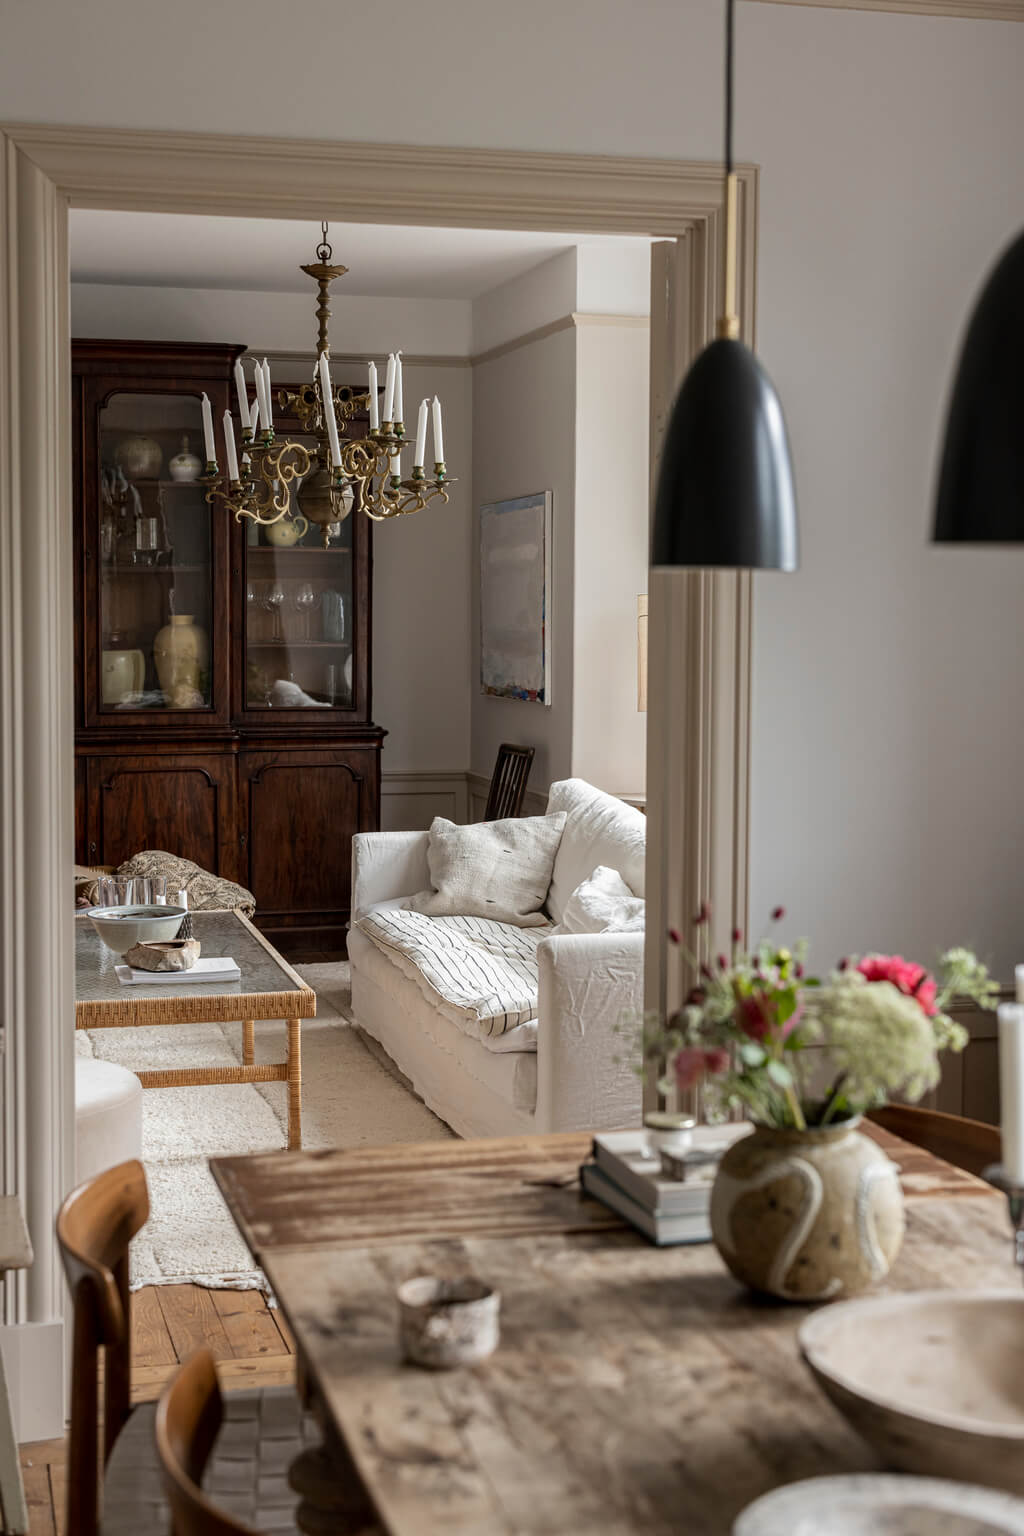 A Scandinavian Apartment with Antique Furniture